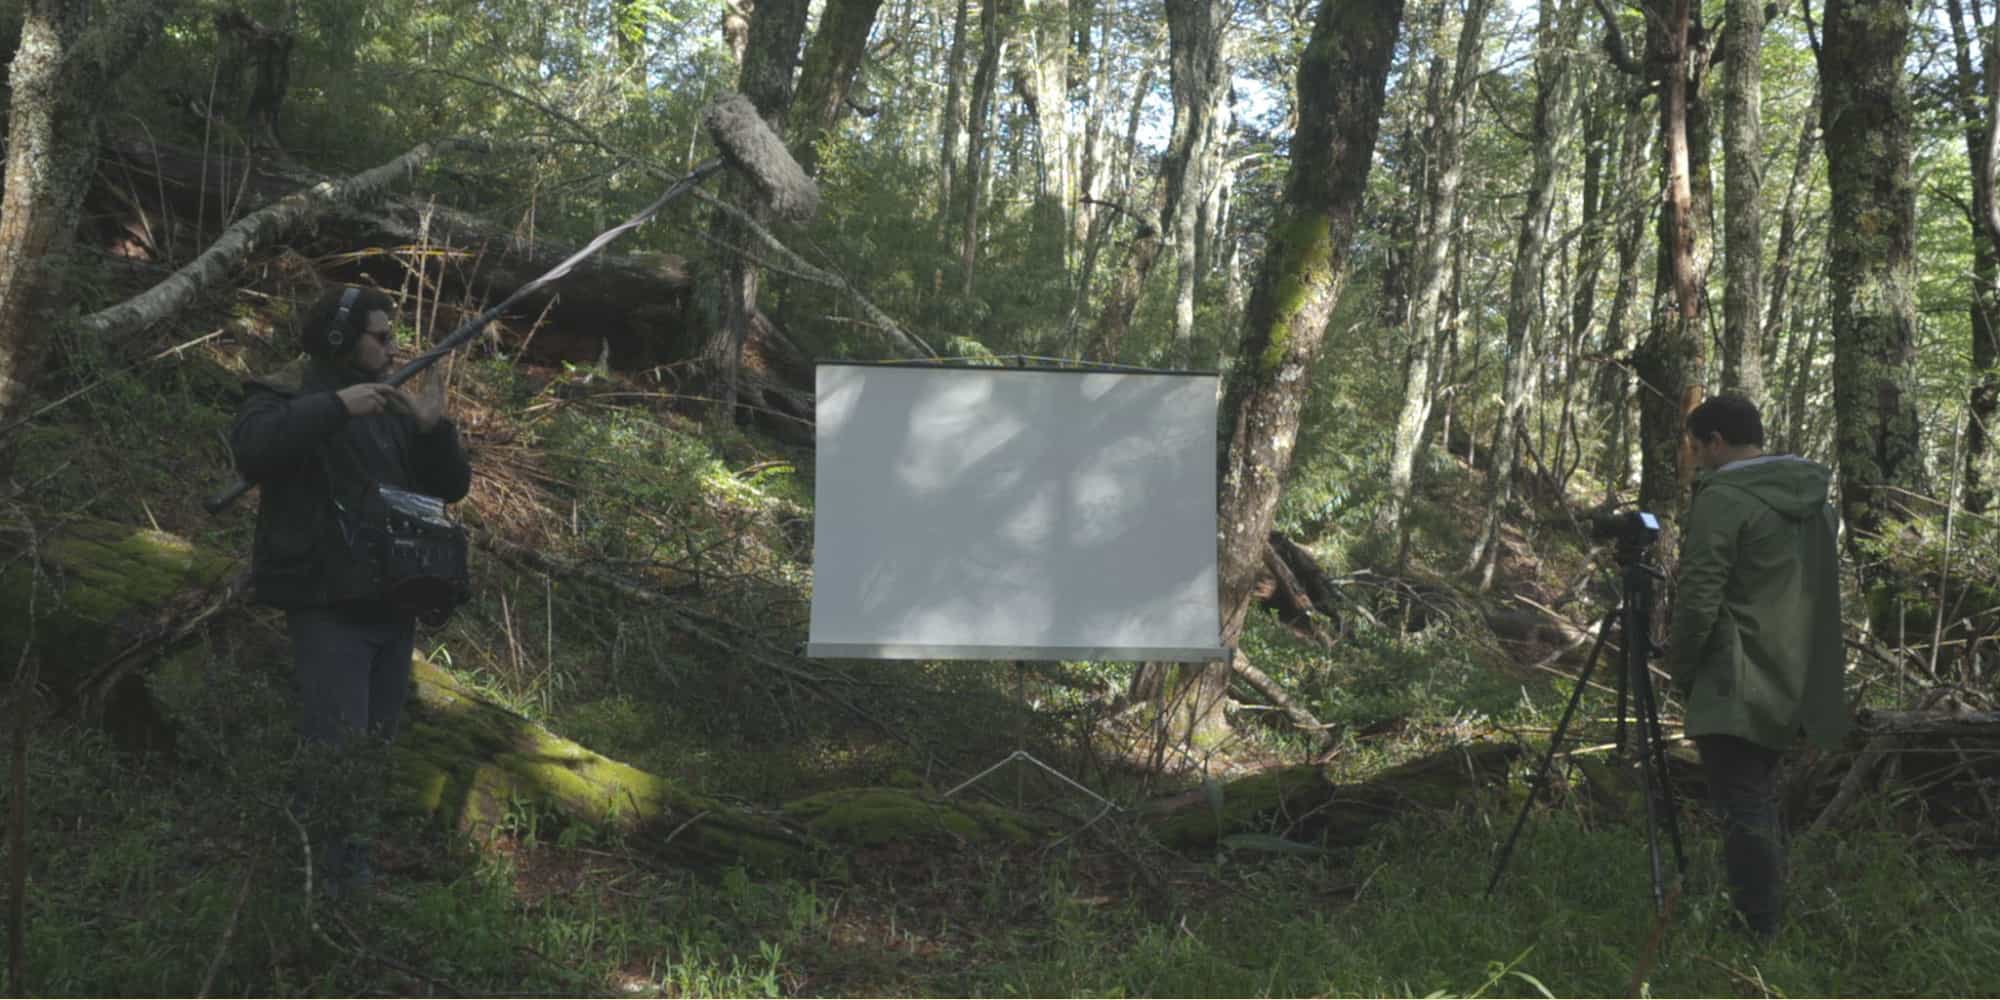 Photo Still - Limits of projection